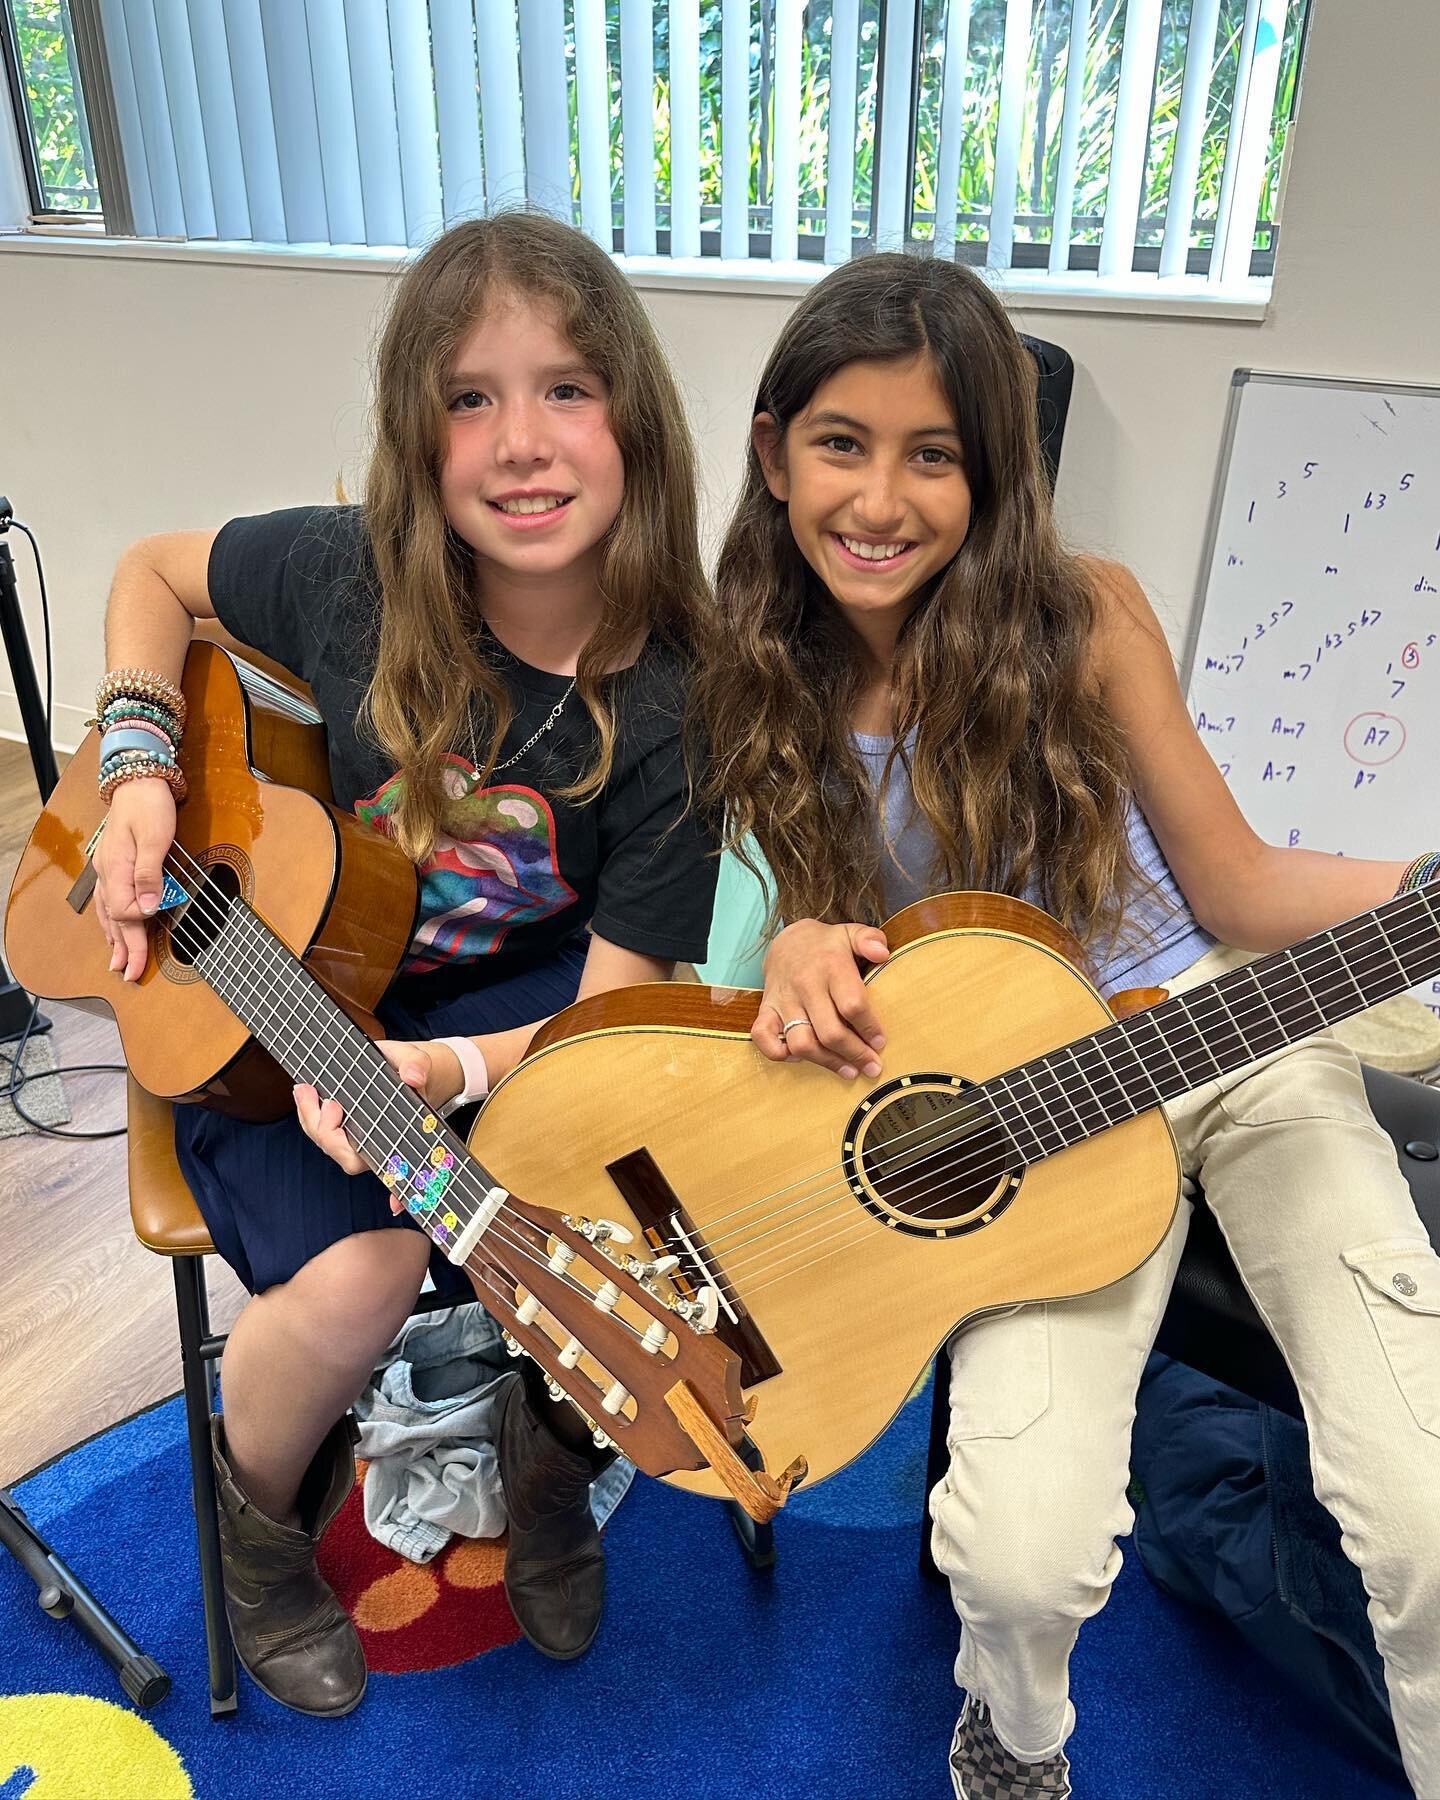 Music is even better with friends! 👯&zwj;♀️🎶 #friendshipgoals #kidsrock #womanownedbusiness